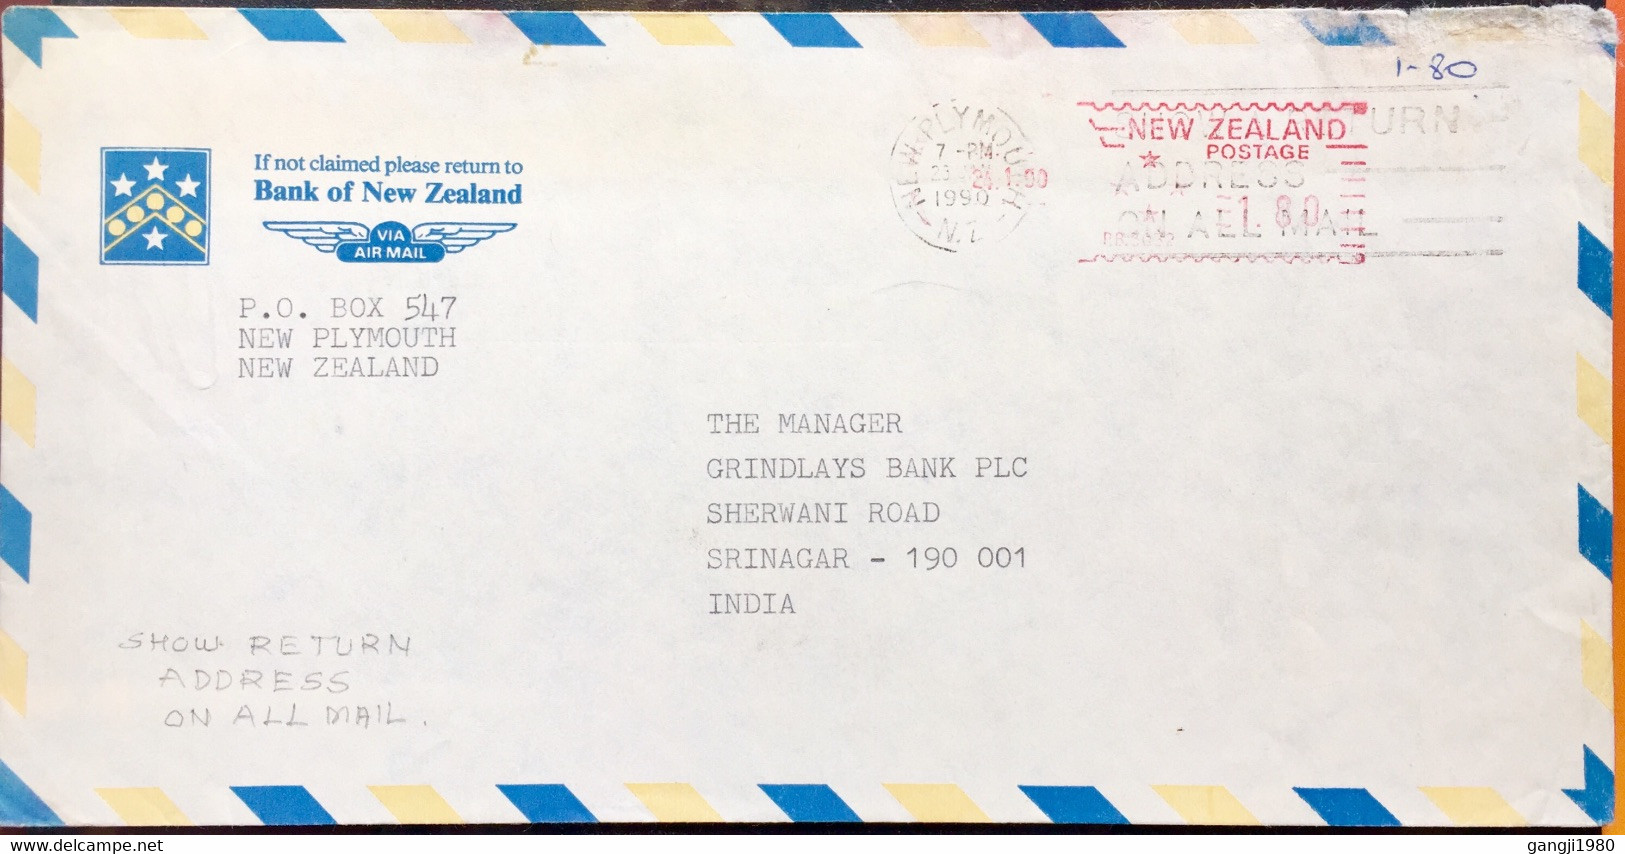 NEW ZEALAND 1990 SHOW RETURN ADDRESS ON ALL MAIL SLOGAN,NEW PLYMOUTH TO INDIA BANK OF NEW ZEALAND METER CANCELLATION - Cartas & Documentos